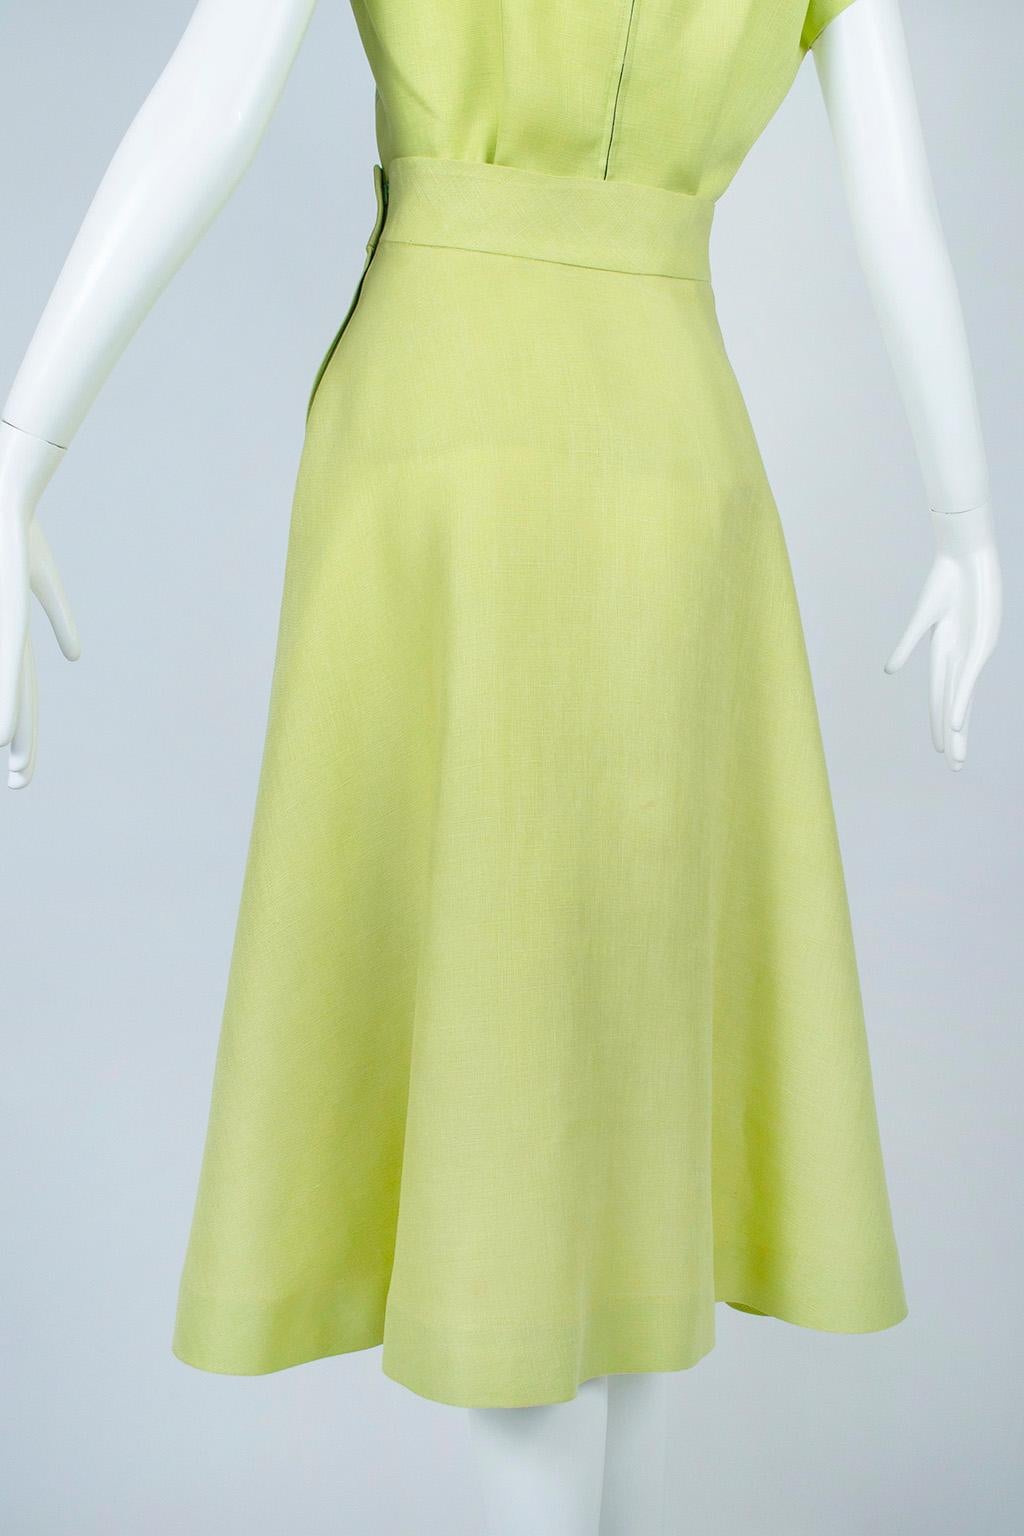 Bespoke Lime Hand-Painted Salvador Corona Peacock Skirt and Top, Mexico-M, 1950s For Sale 6